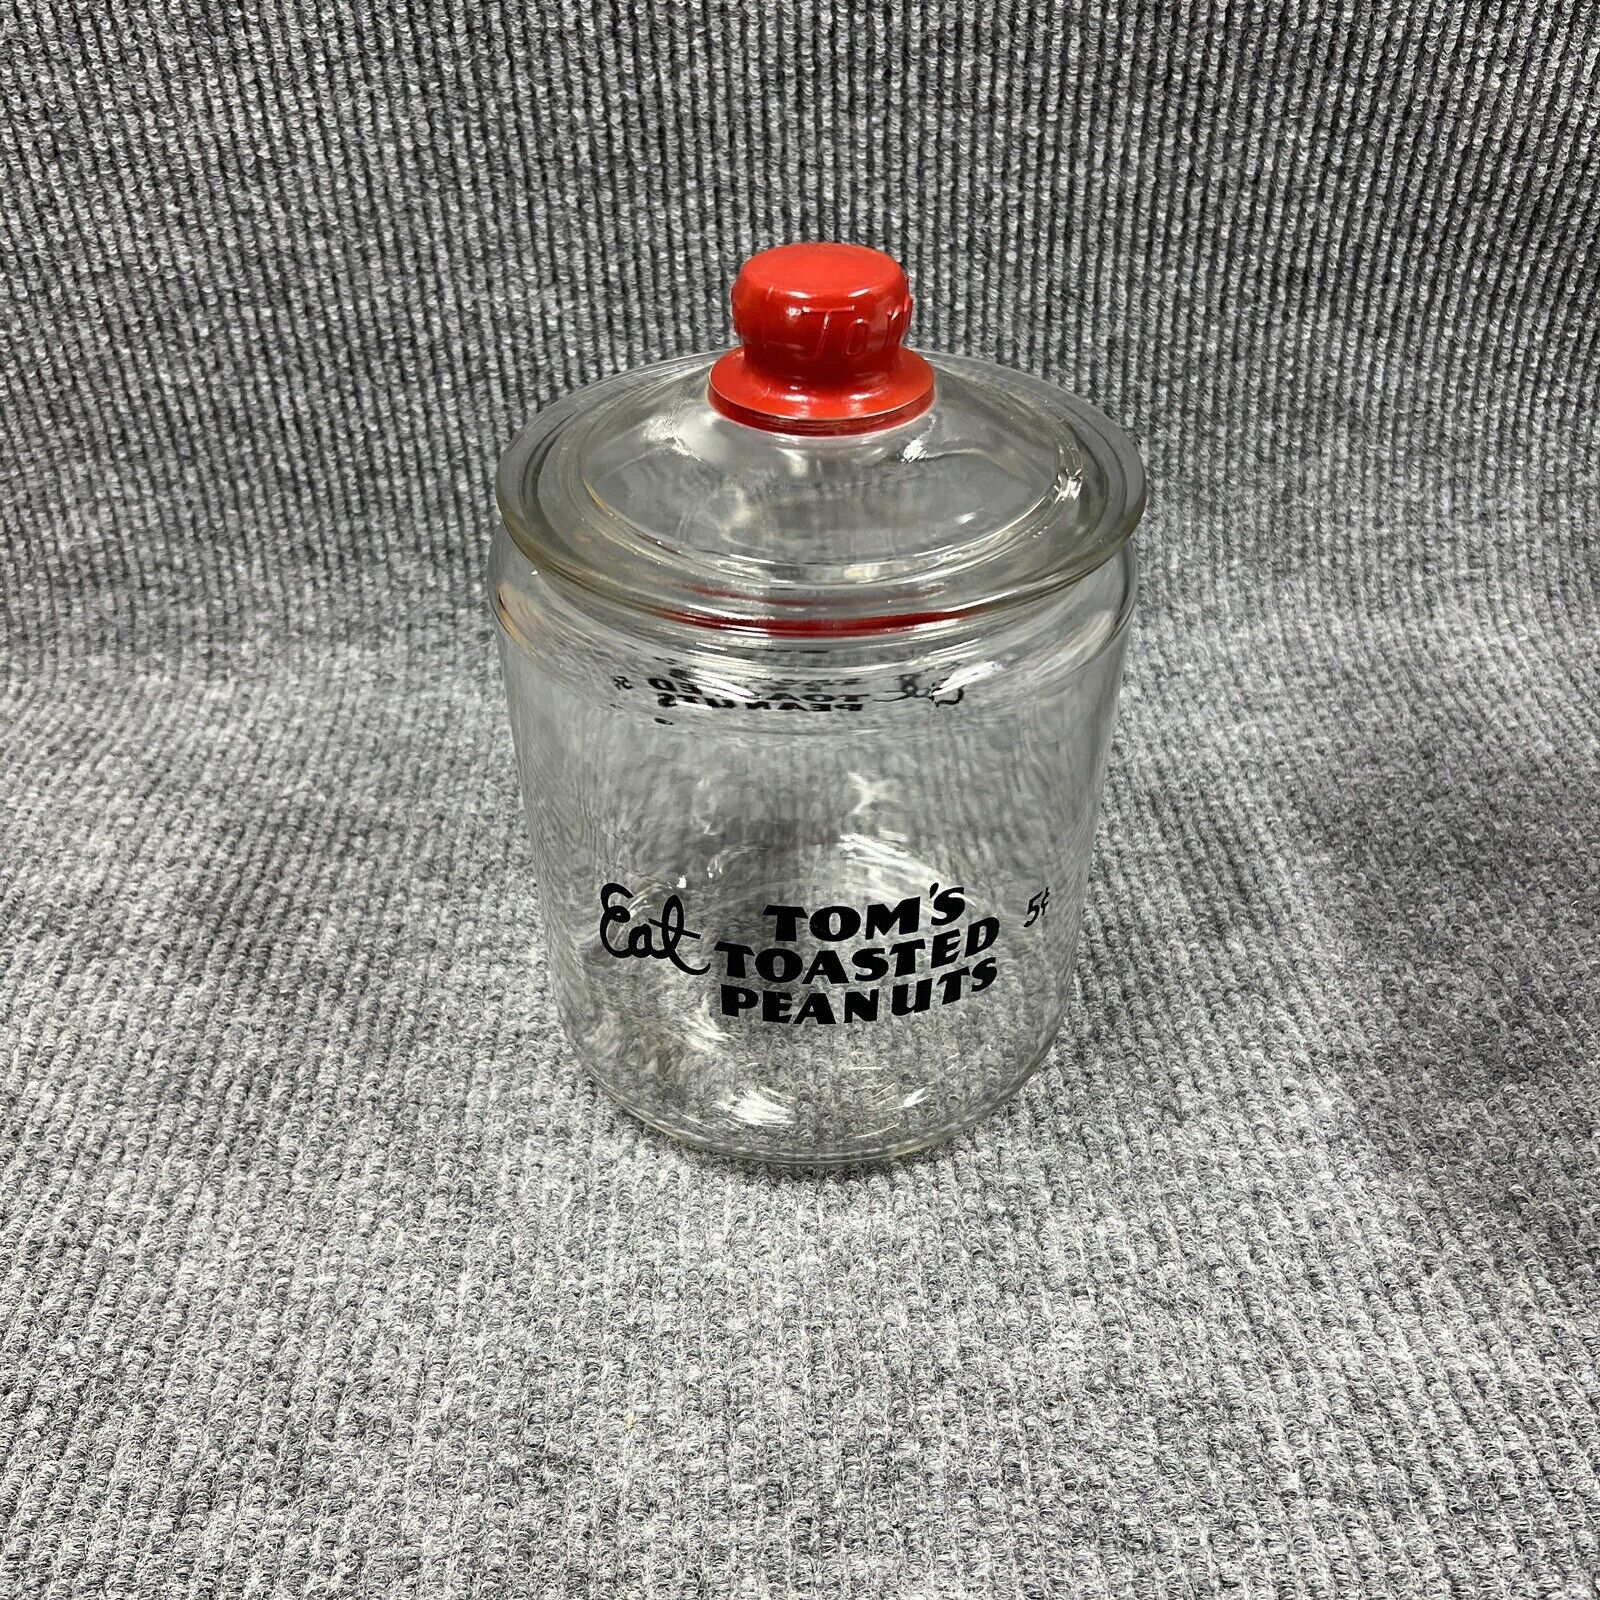 VTG Tom’s Glass Jar Counter Top Eat Toasted Peanuts 5 Cents Embossed Red Knob